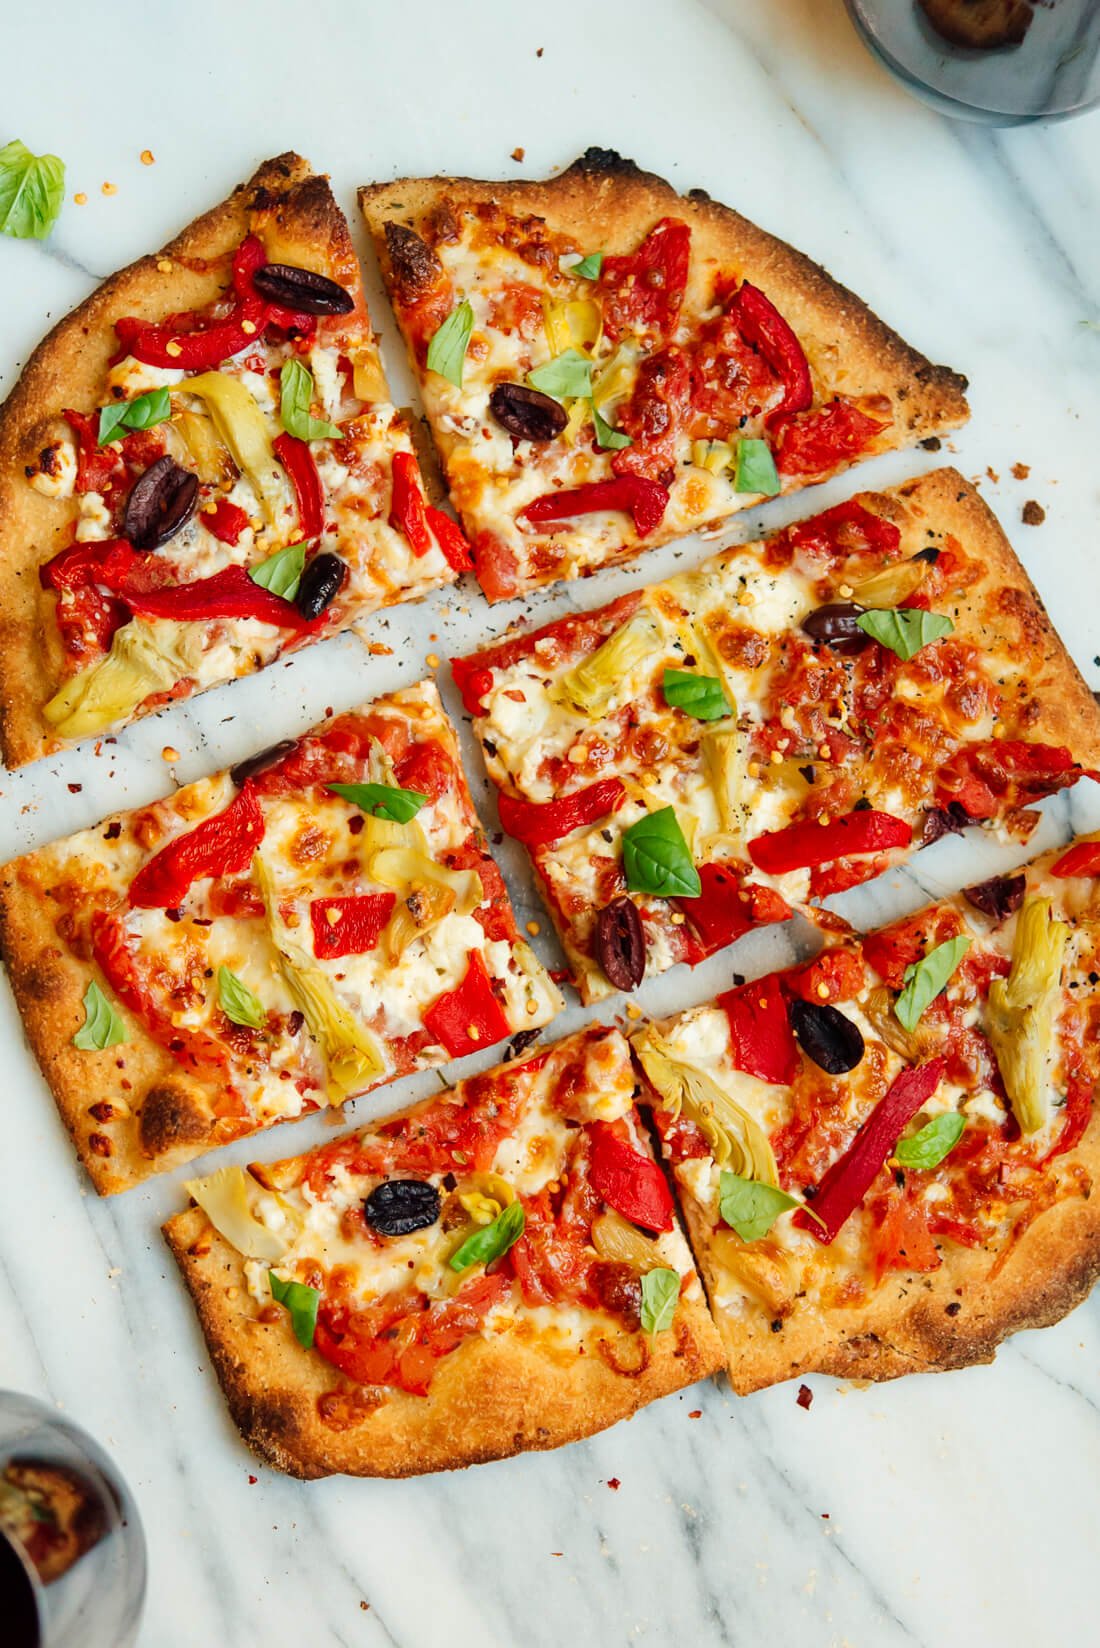 Greek pizza recipe, featuring feta, roasted red peppers, artichoke and olives!